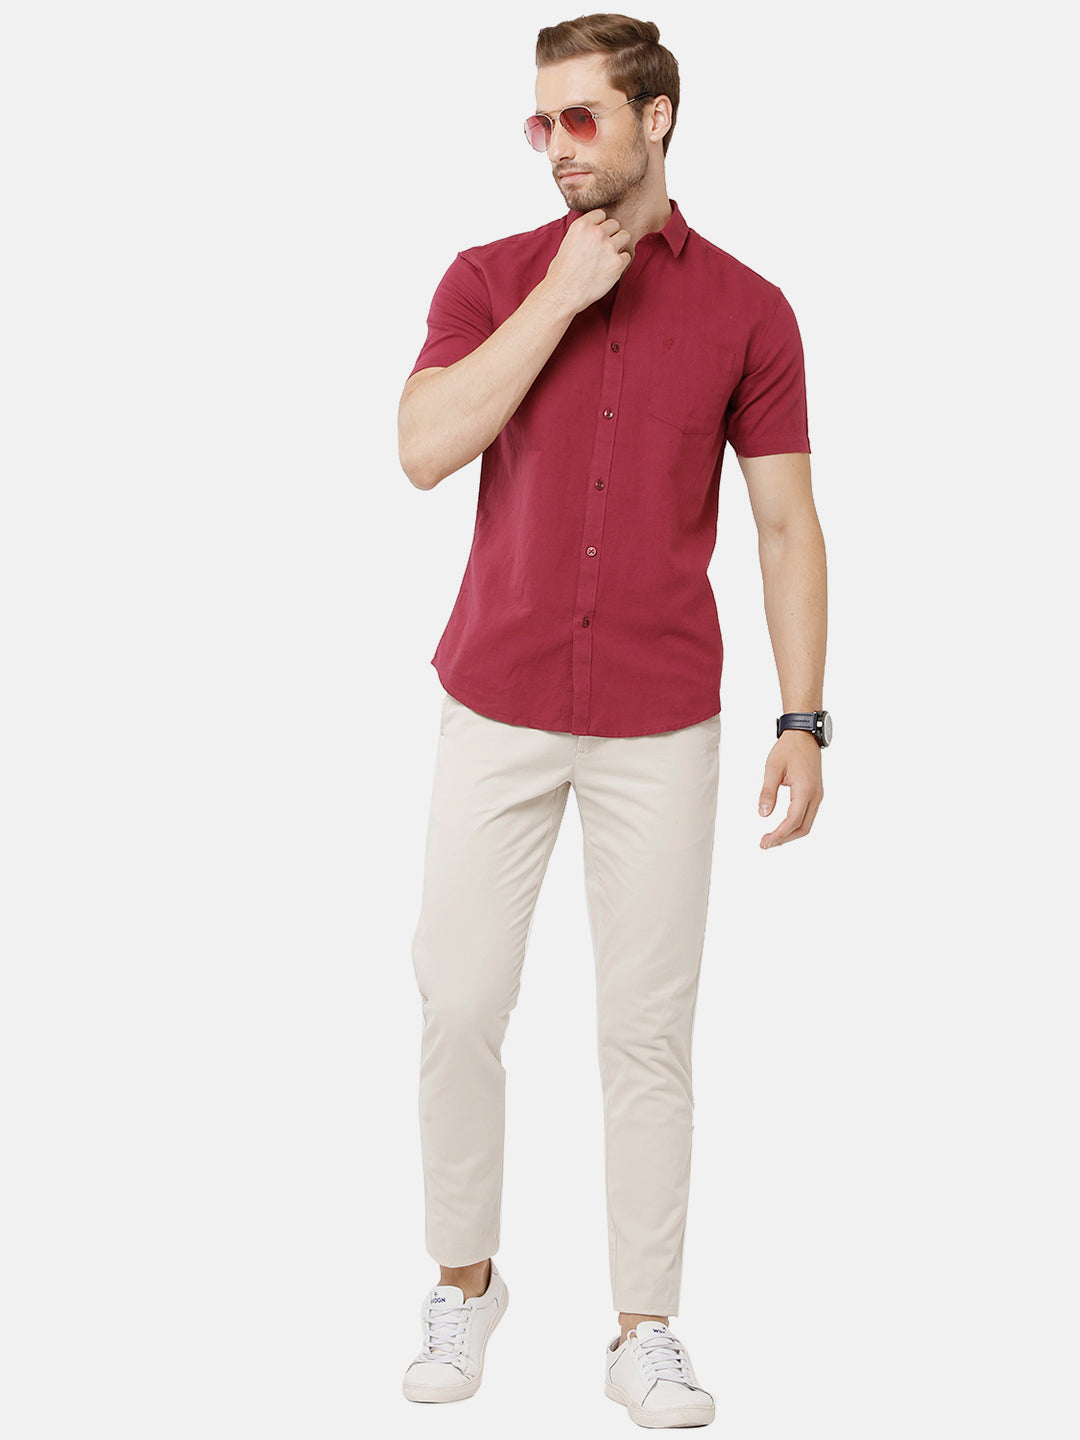 Classic Polo Mens Solid Milano Fit Half Sleeve Maroon Color Woven Shirt - Mica Maroon HS